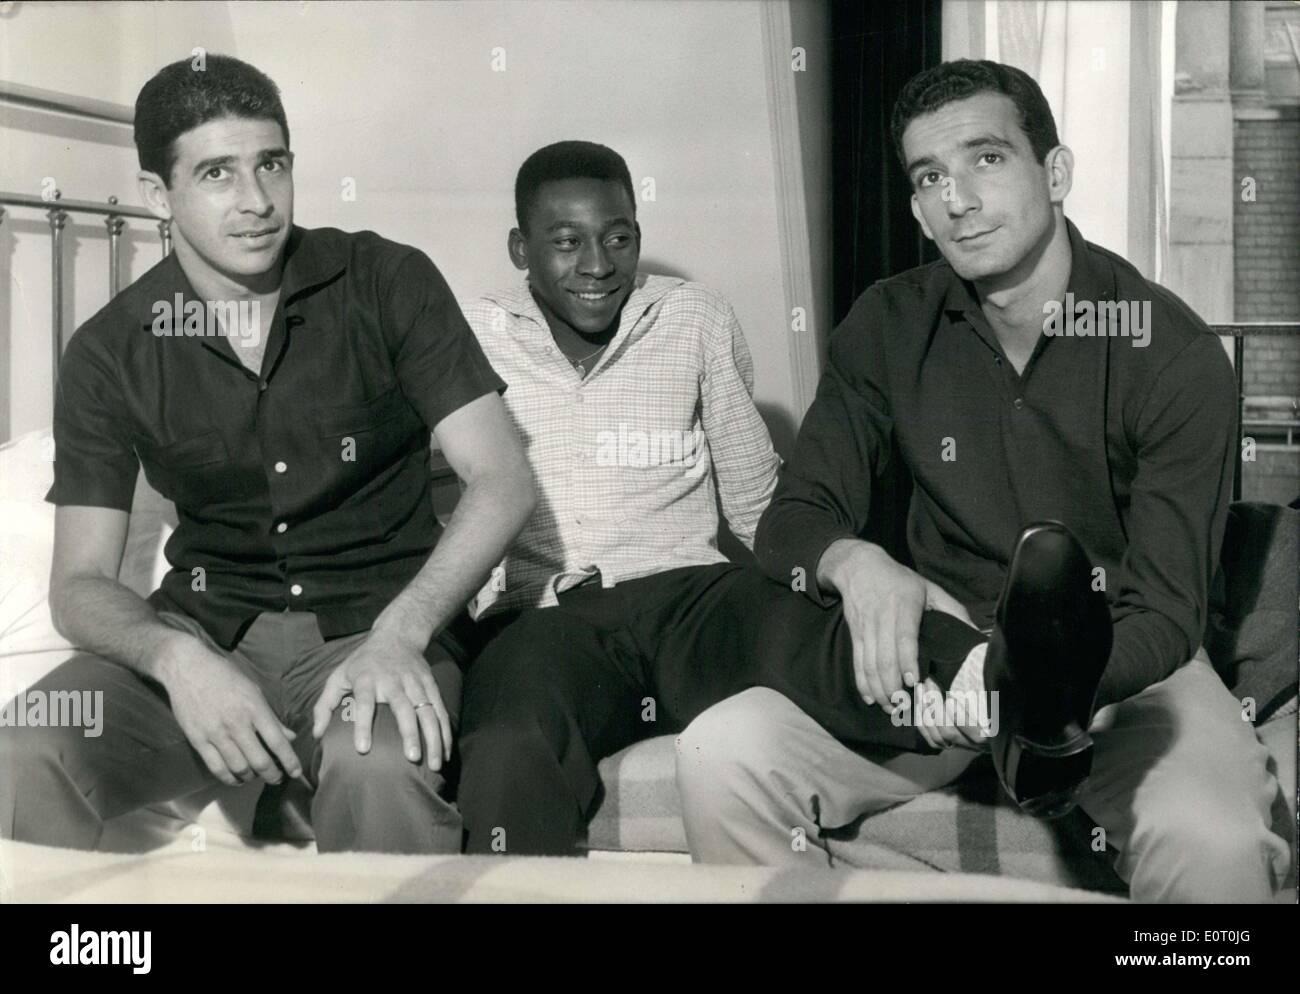 Jun. 06, 1960 - The Best Soccer Players in the World: Ney, Pel?, and Mauro Stock Photo